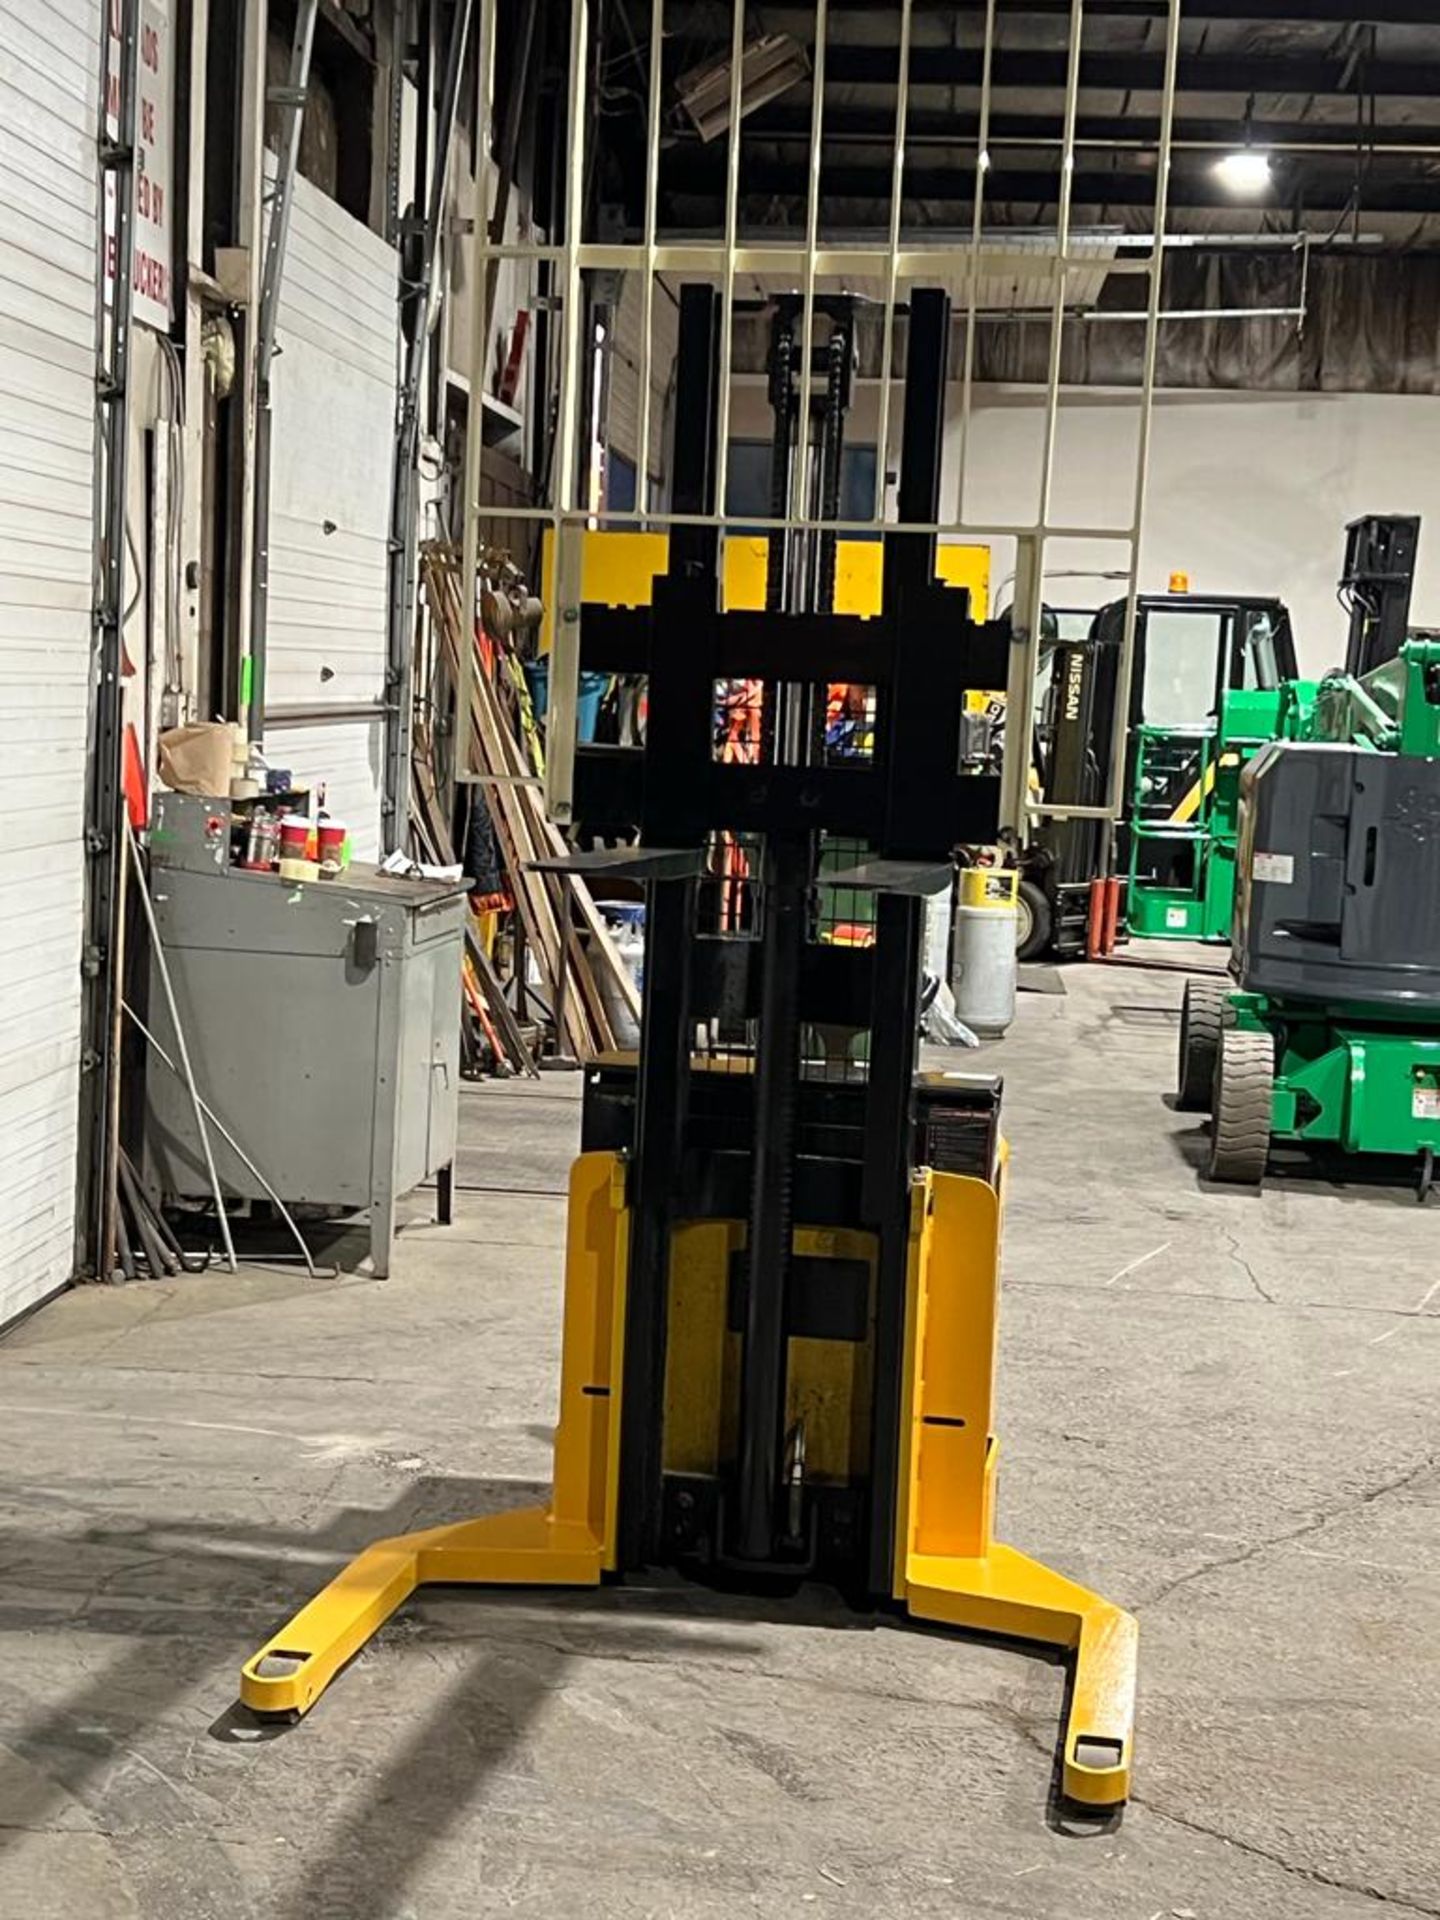 Yale Pallet Stacker Walk Behind 4,000lbs capacity electric Powered Pallet Cart 24V - FREE CUSTOMS - Image 2 of 3